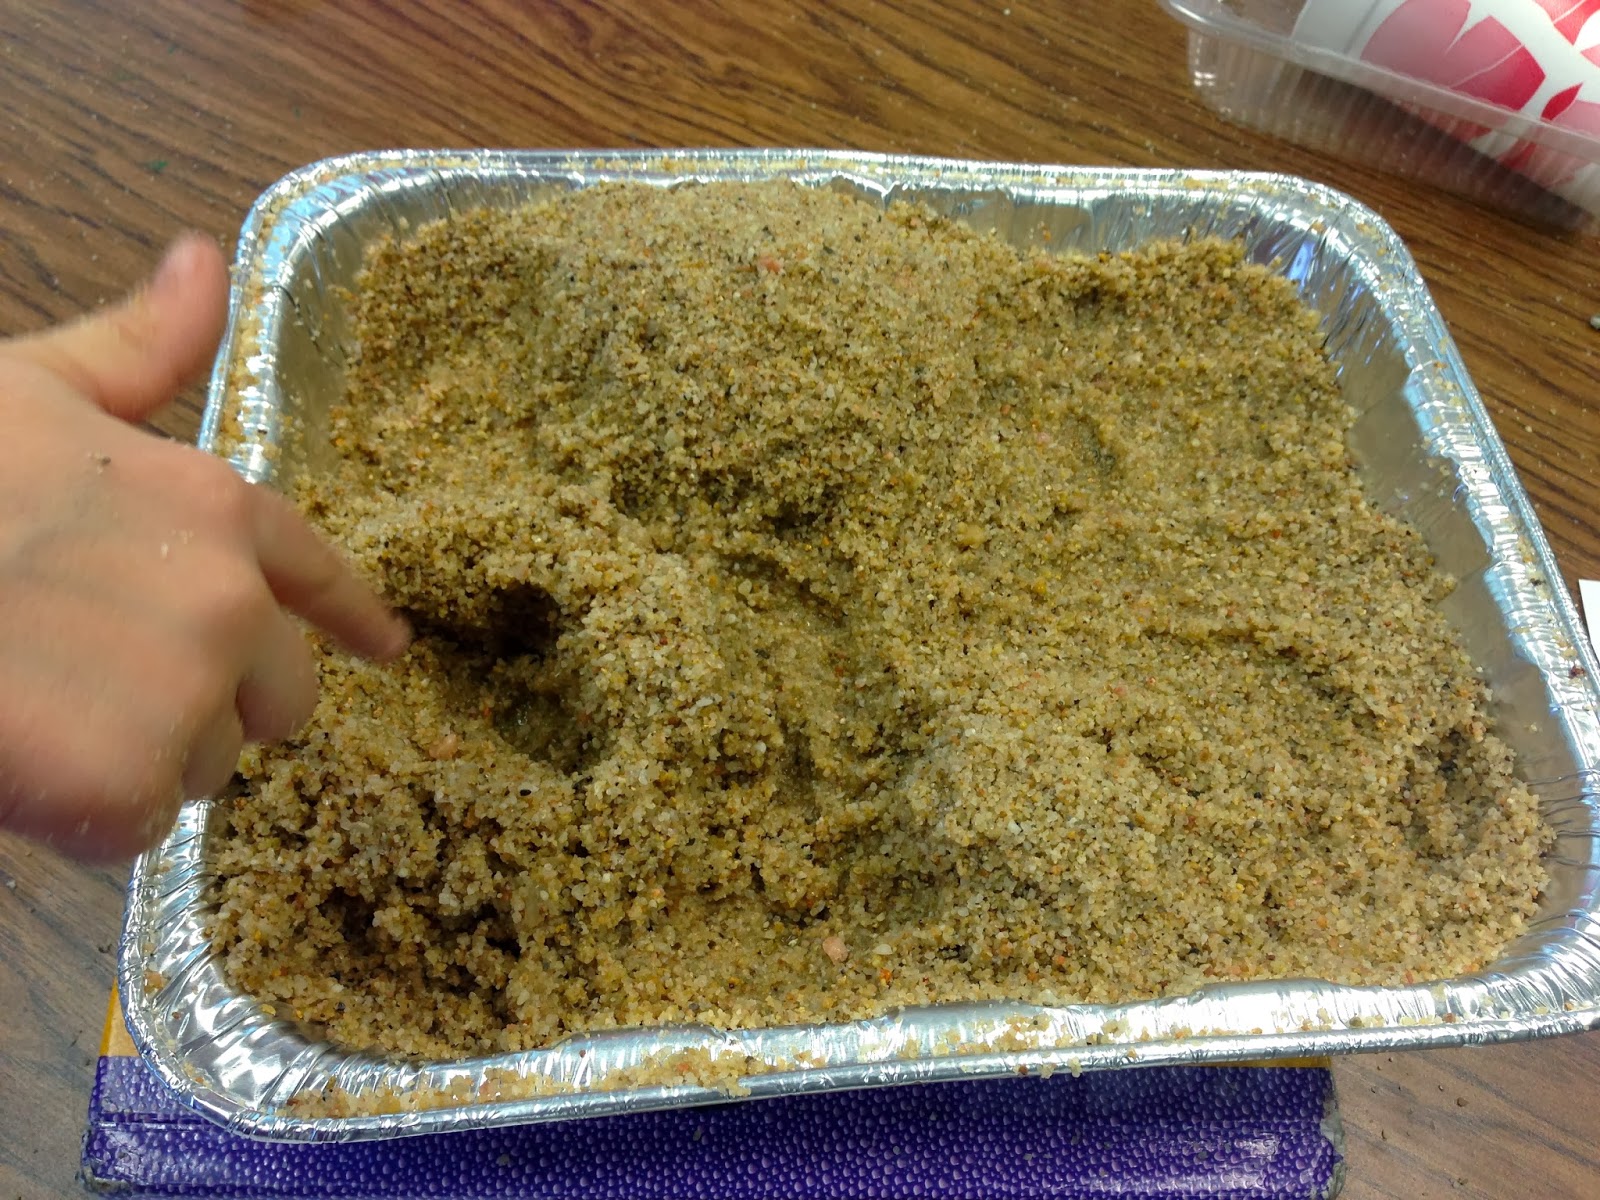 Are you teaching about rocks and minerals? Grab this FREE science lab on erosion that your students will LOVE!